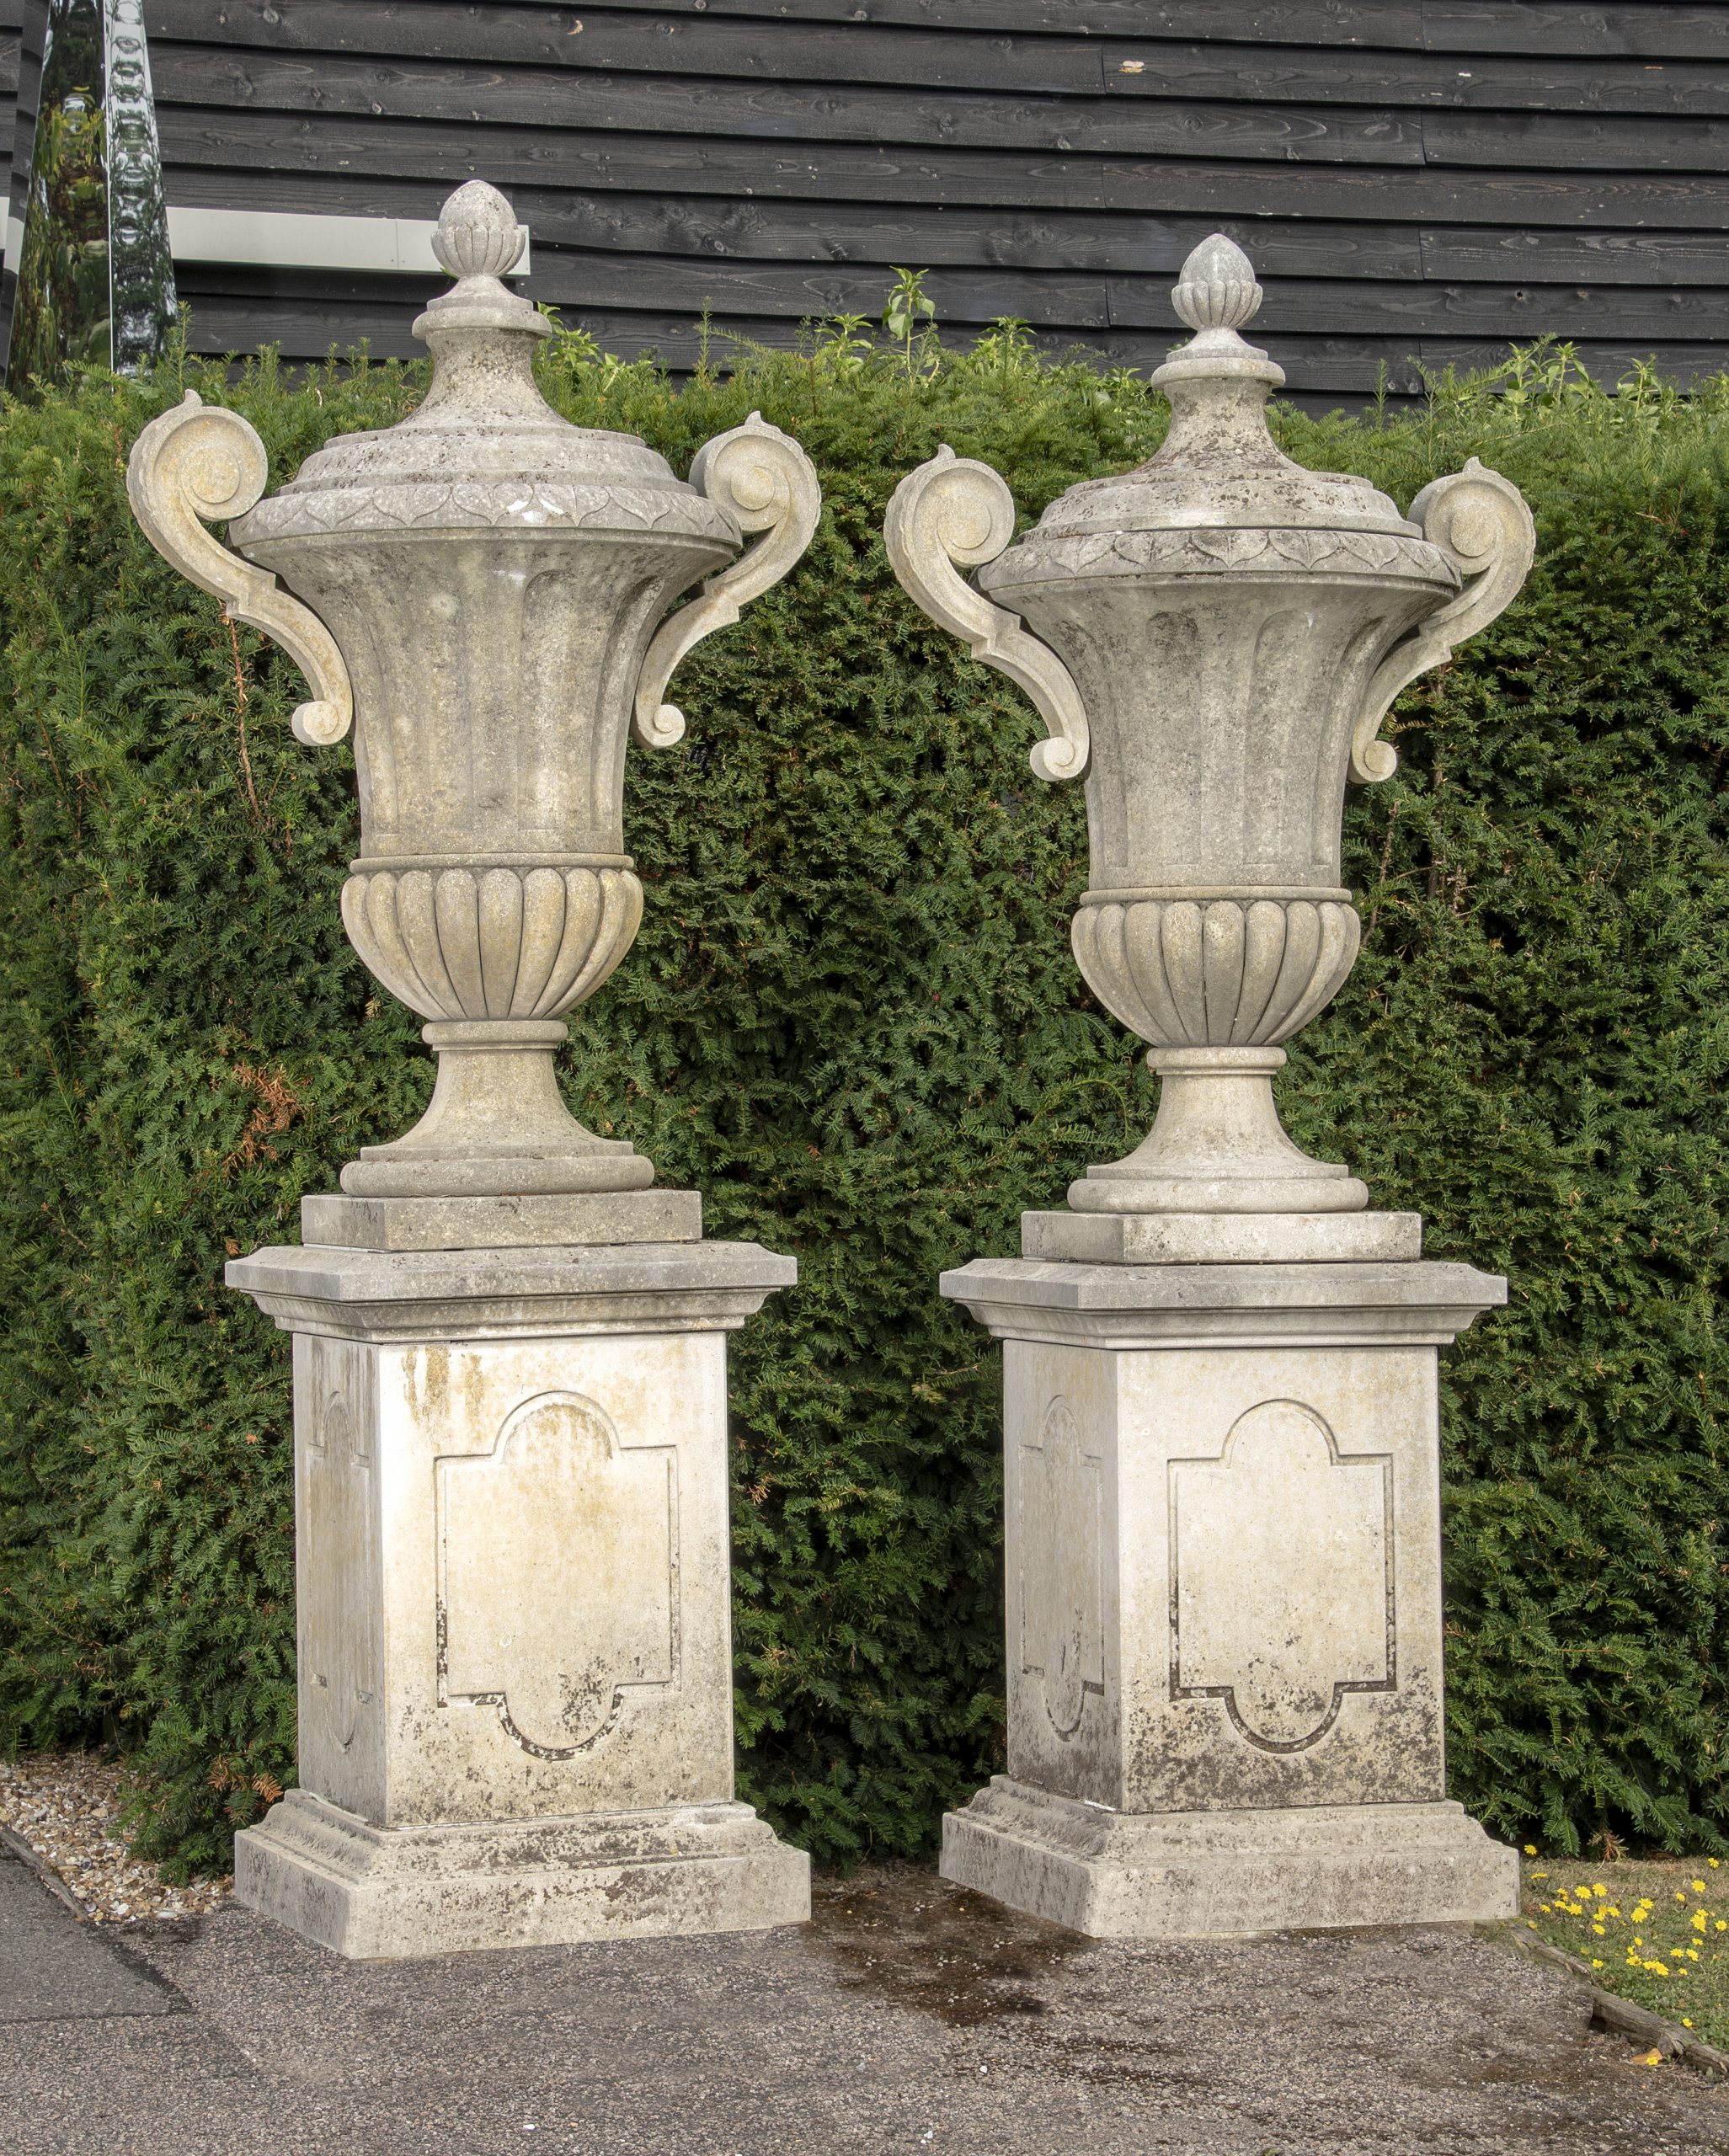 A pair of large carved limestone lidded urns with handles on pedestals